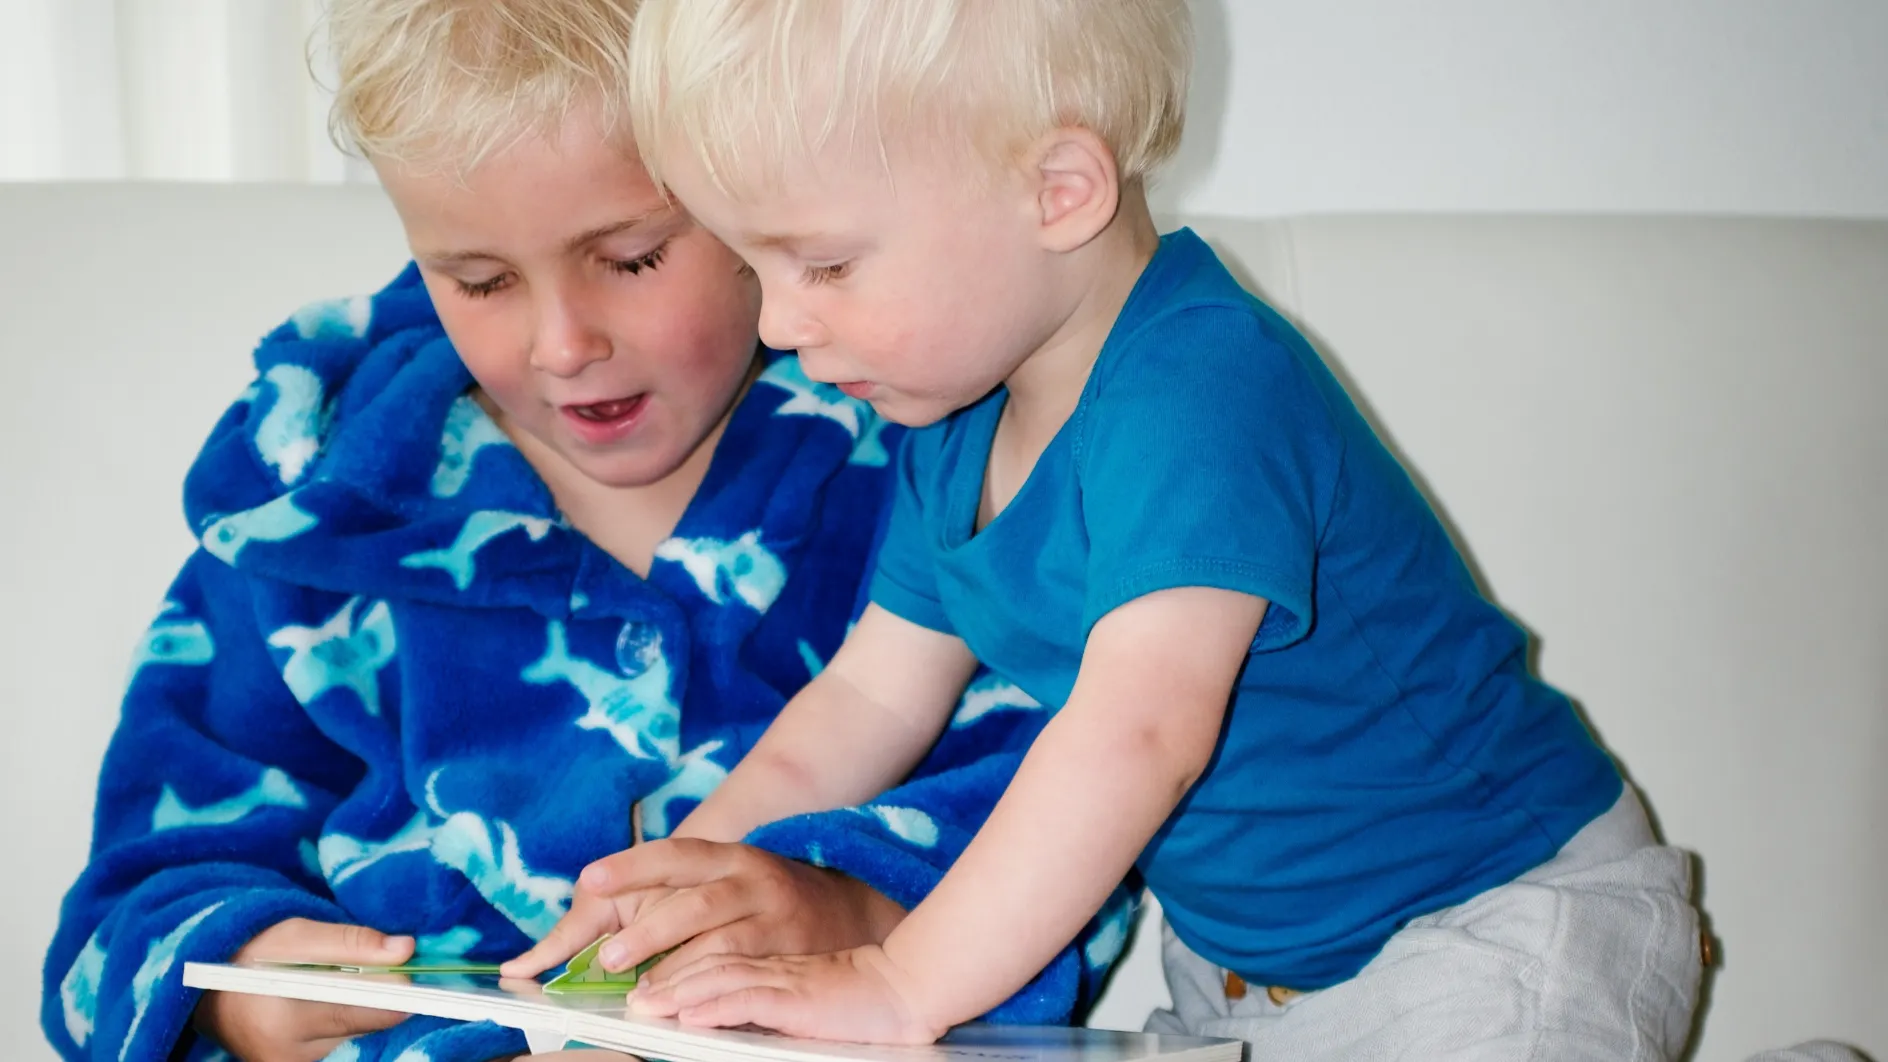 Boys in blue pajamas engrossed in reading, reminding us to embrace language learning mistakes without fear.